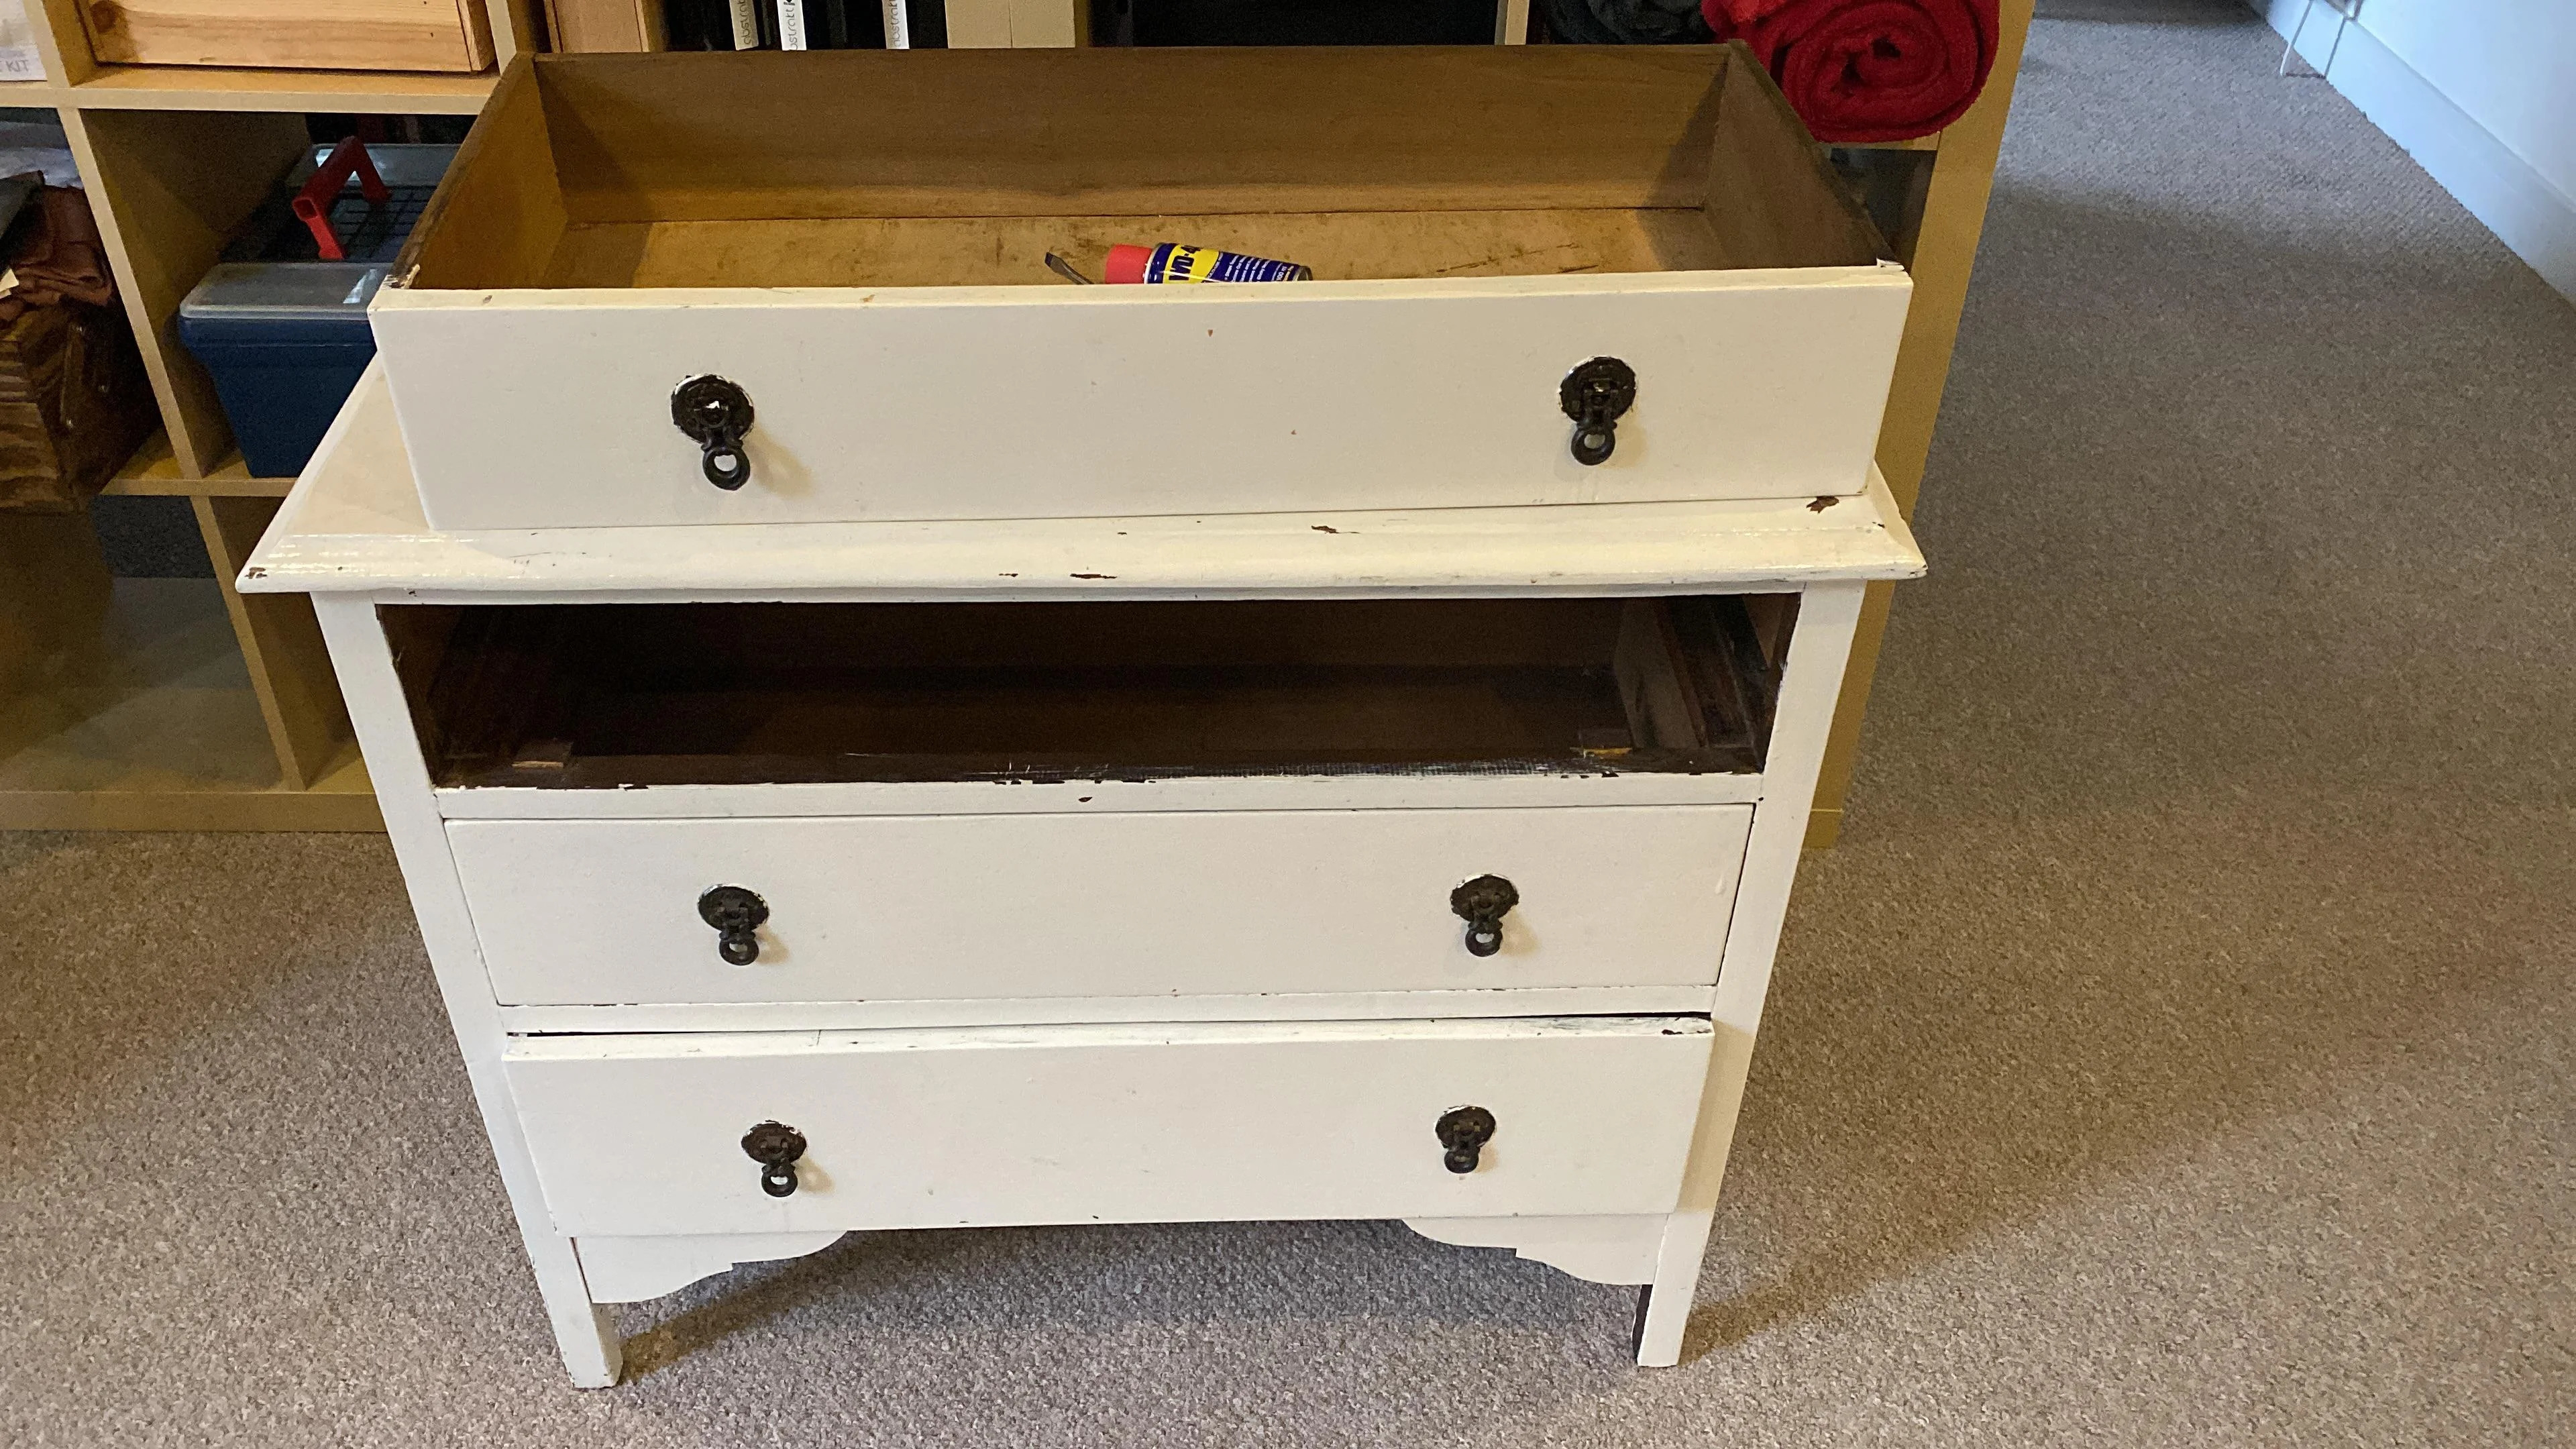 A before image of a beat-up white dresser